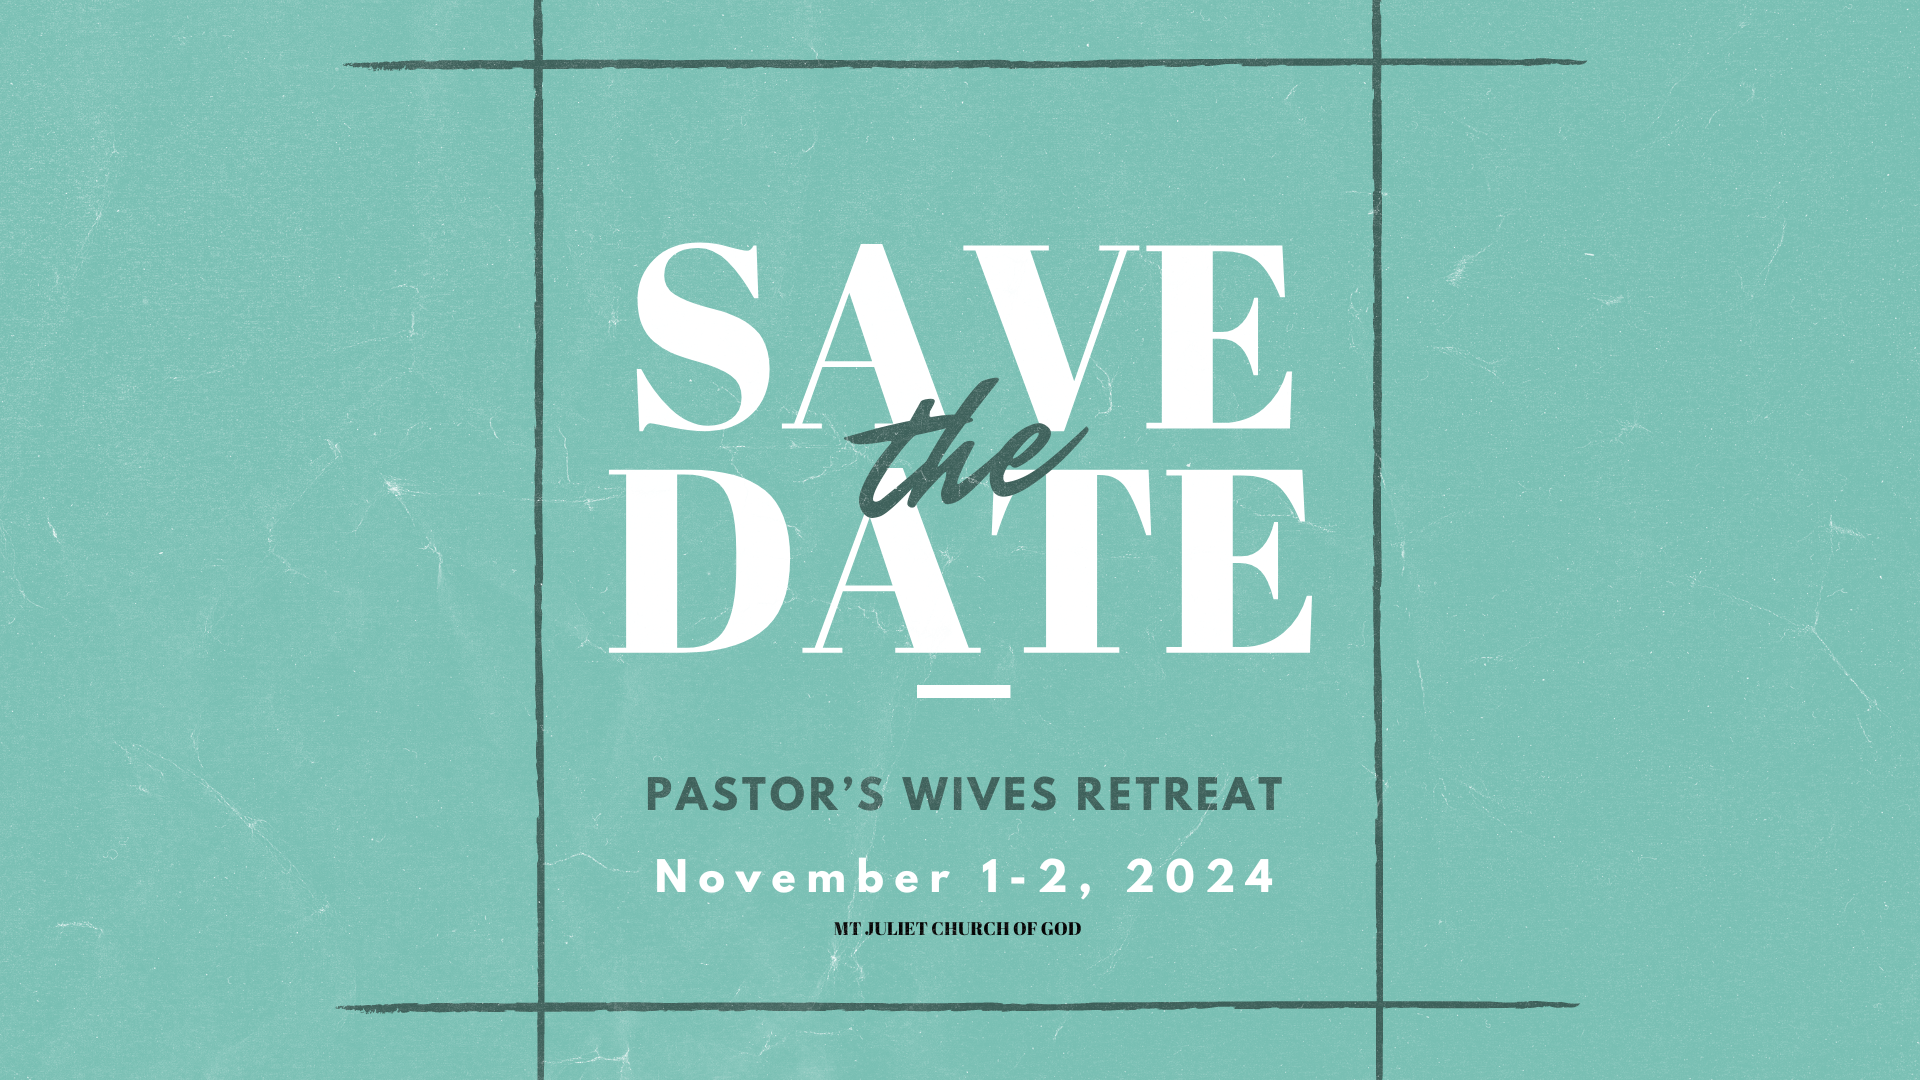 Blue and White Simple Save the Date Invitation (1920 x 1080 px).png